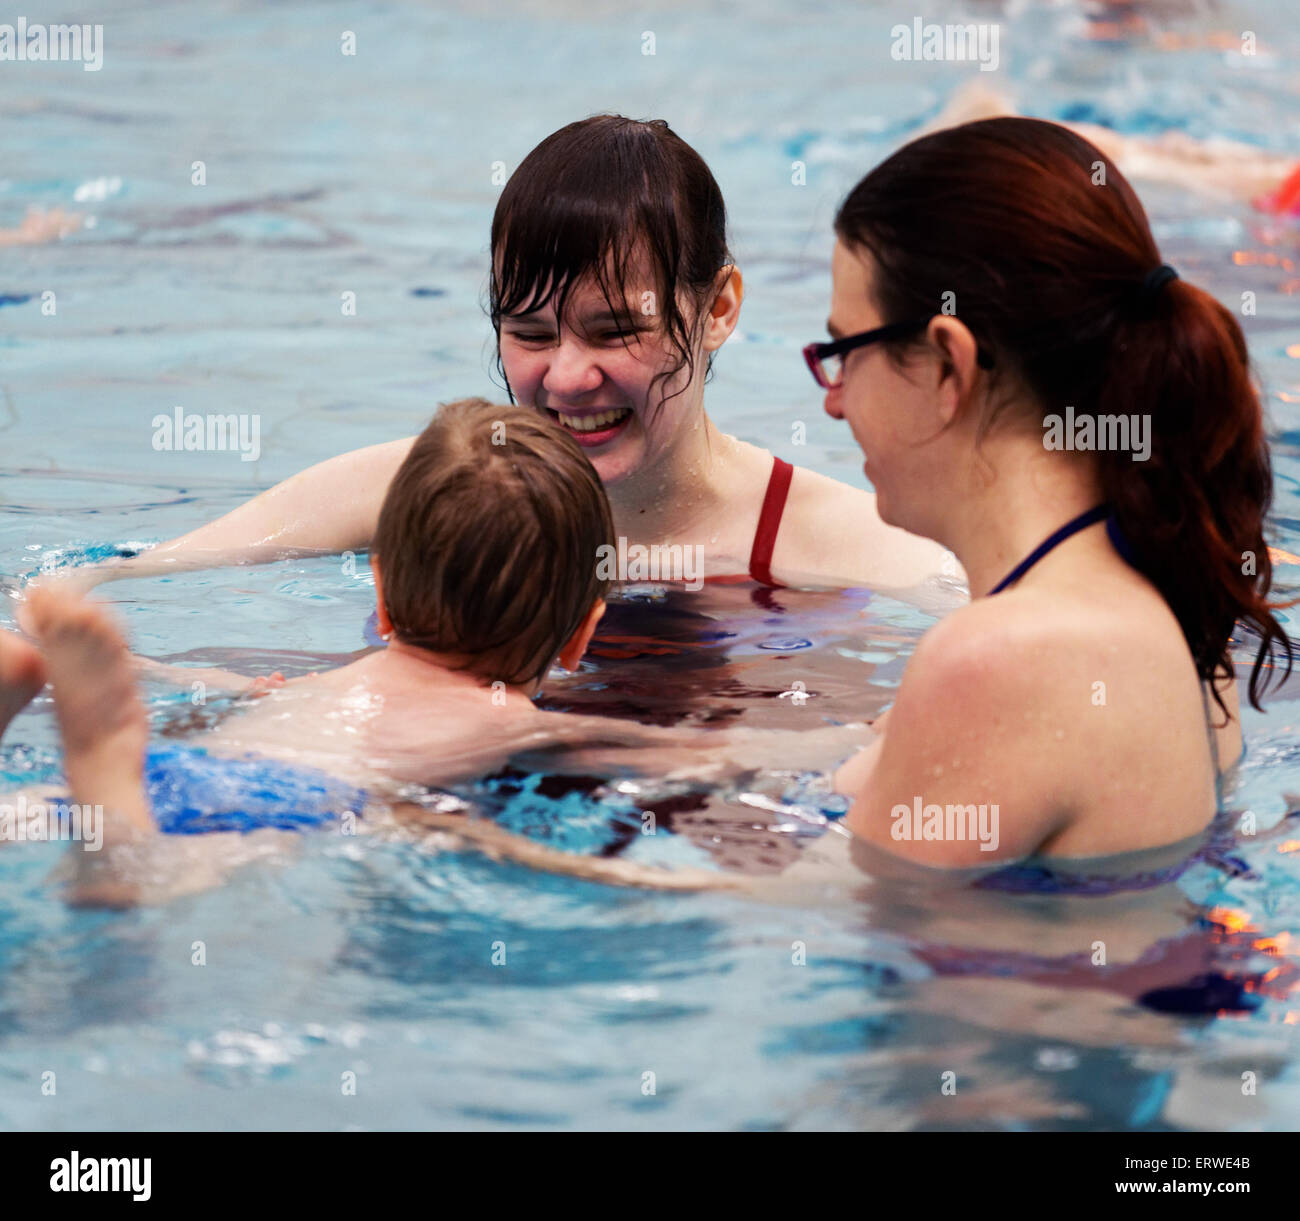 A young boy (two and a half years old) learning to swim Stock Photo